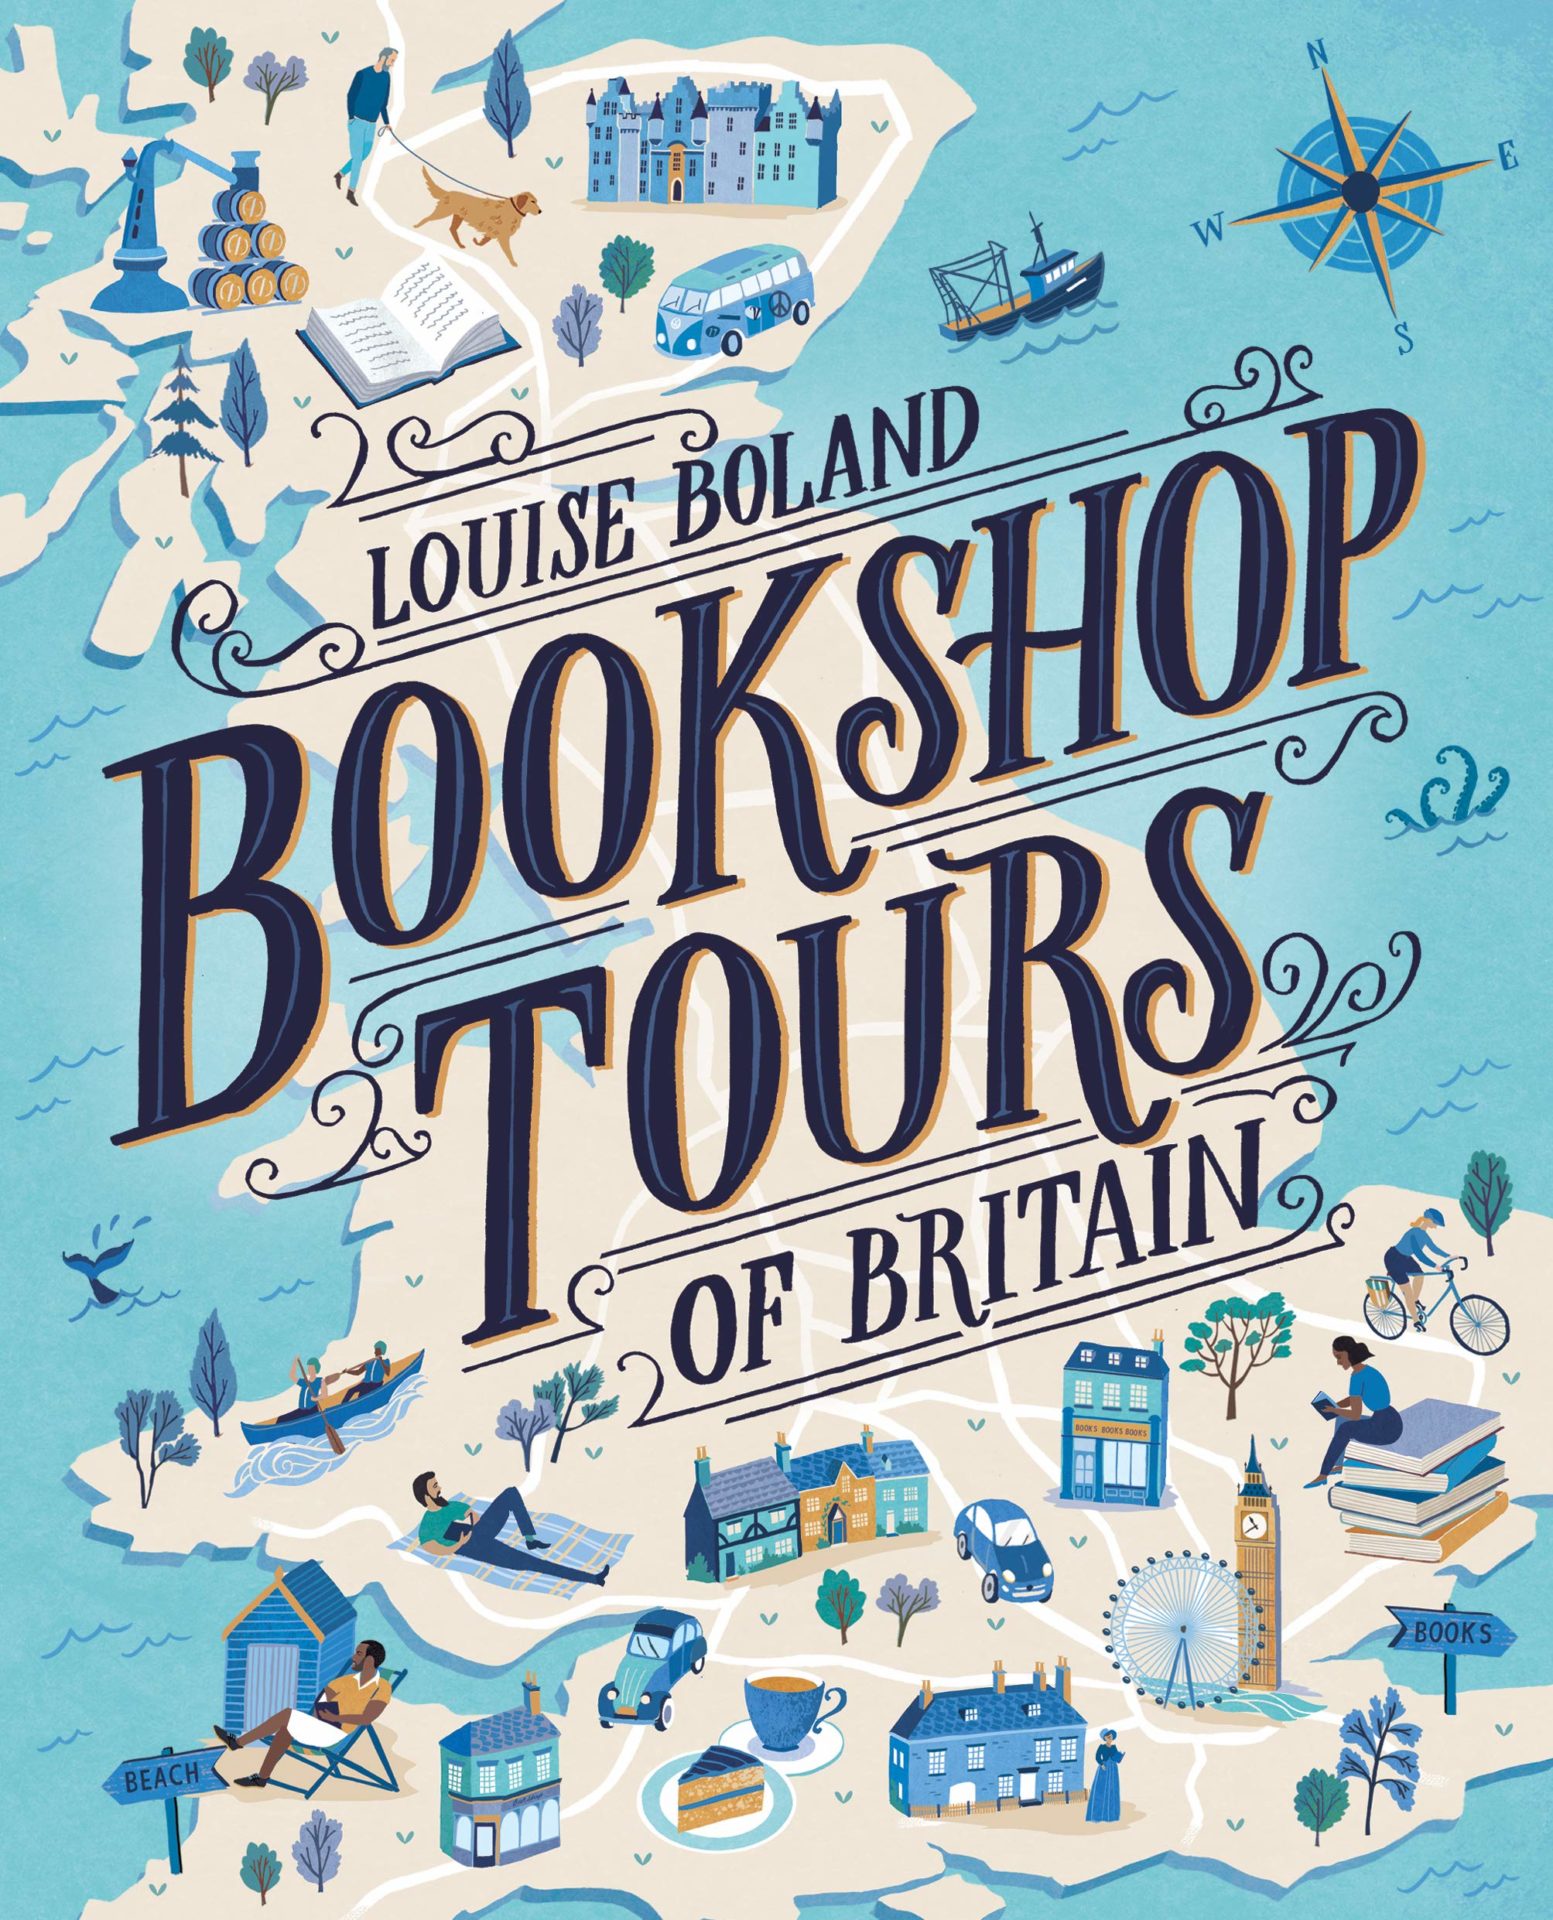 Bookshop Tours of Britain by Louise Boland